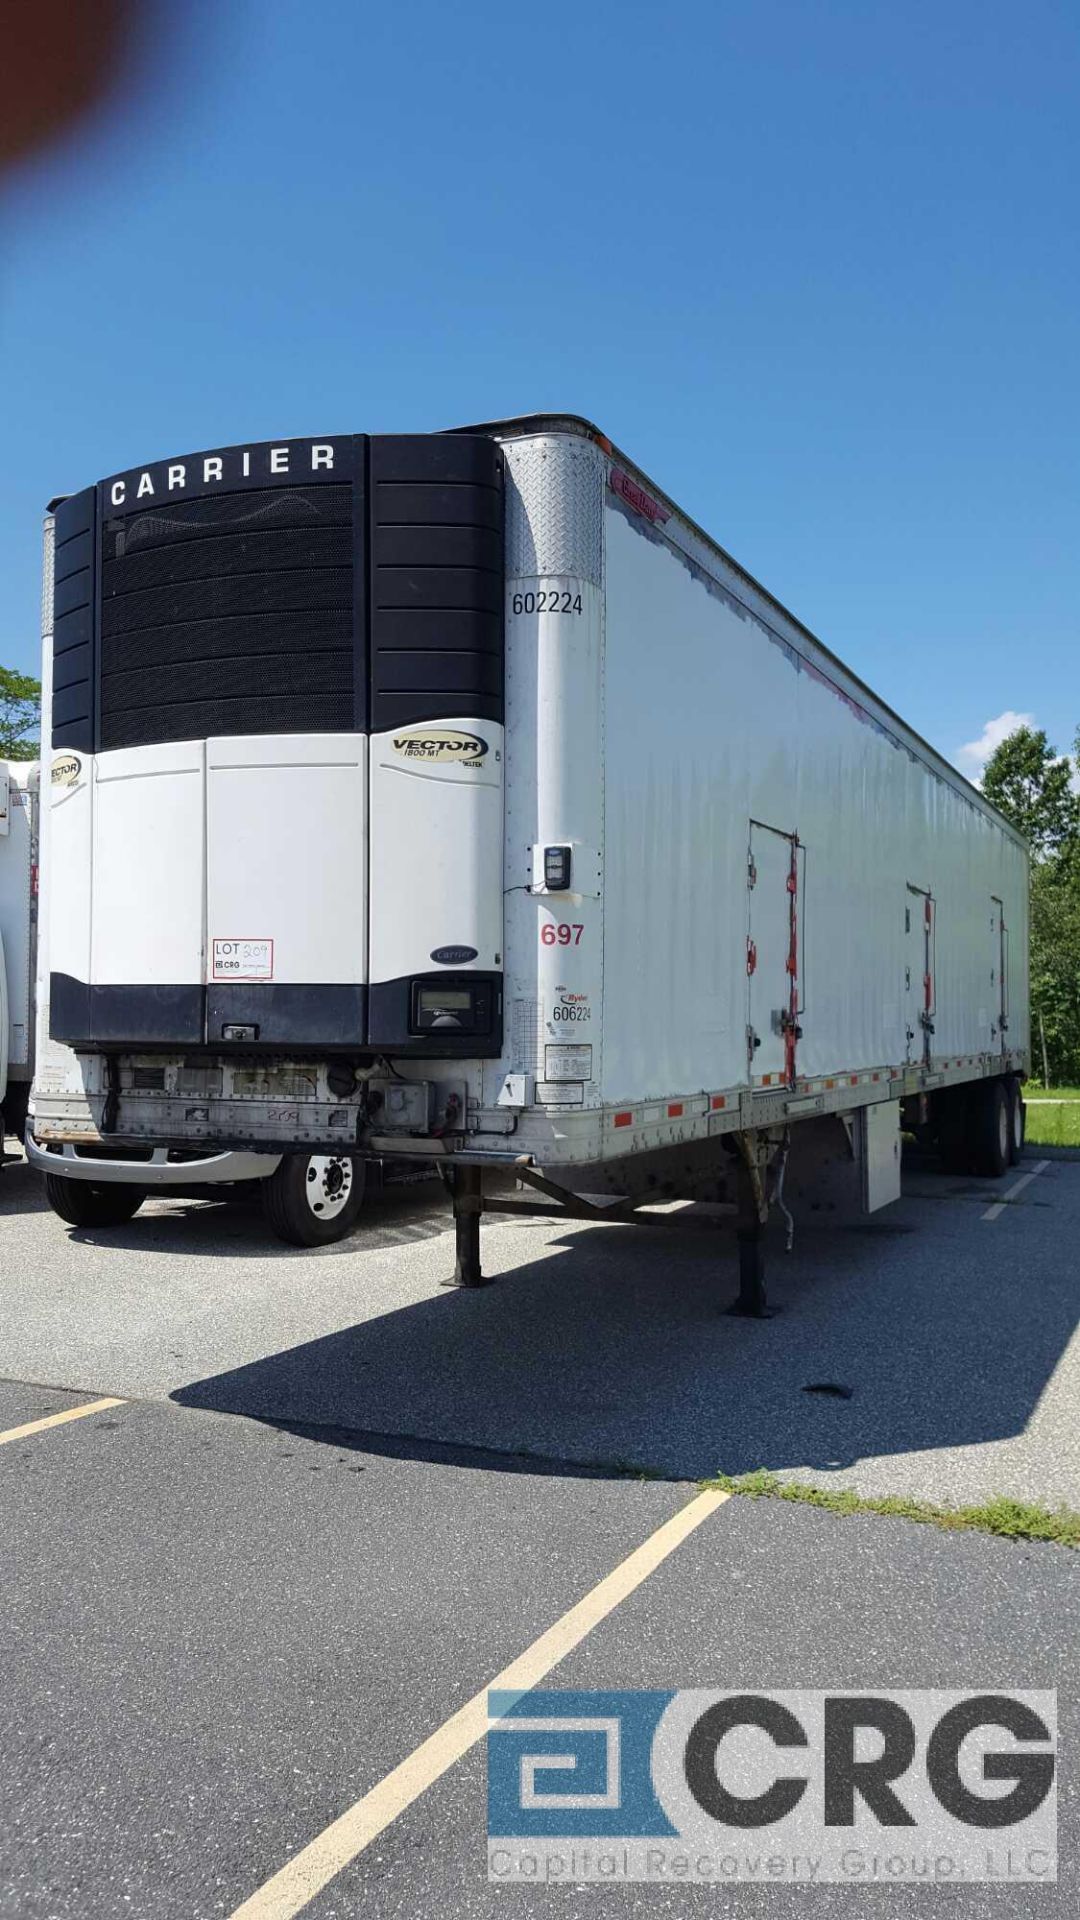 2009 Great Dane Multi Temp Refrigerated Semi Trailer - 45 Long, 102" wide, Carrier Vector 1800MT - Image 4 of 4